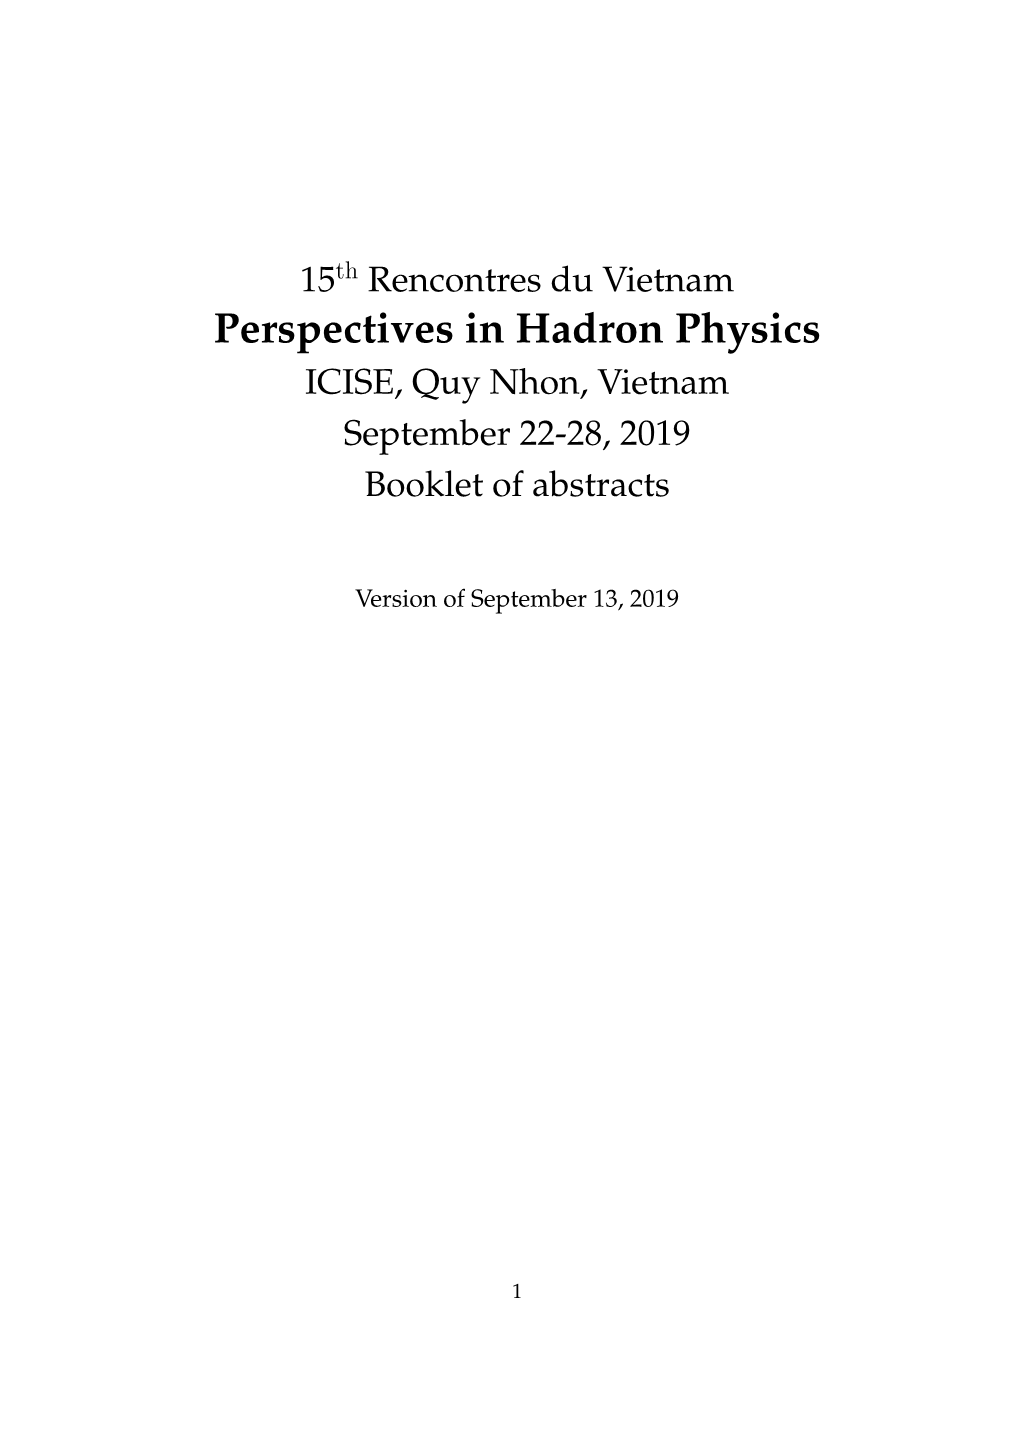 Perspectives in Hadron Physics ICISE, Quy Nhon, Vietnam September 22-28, 2019 Booklet of Abstracts